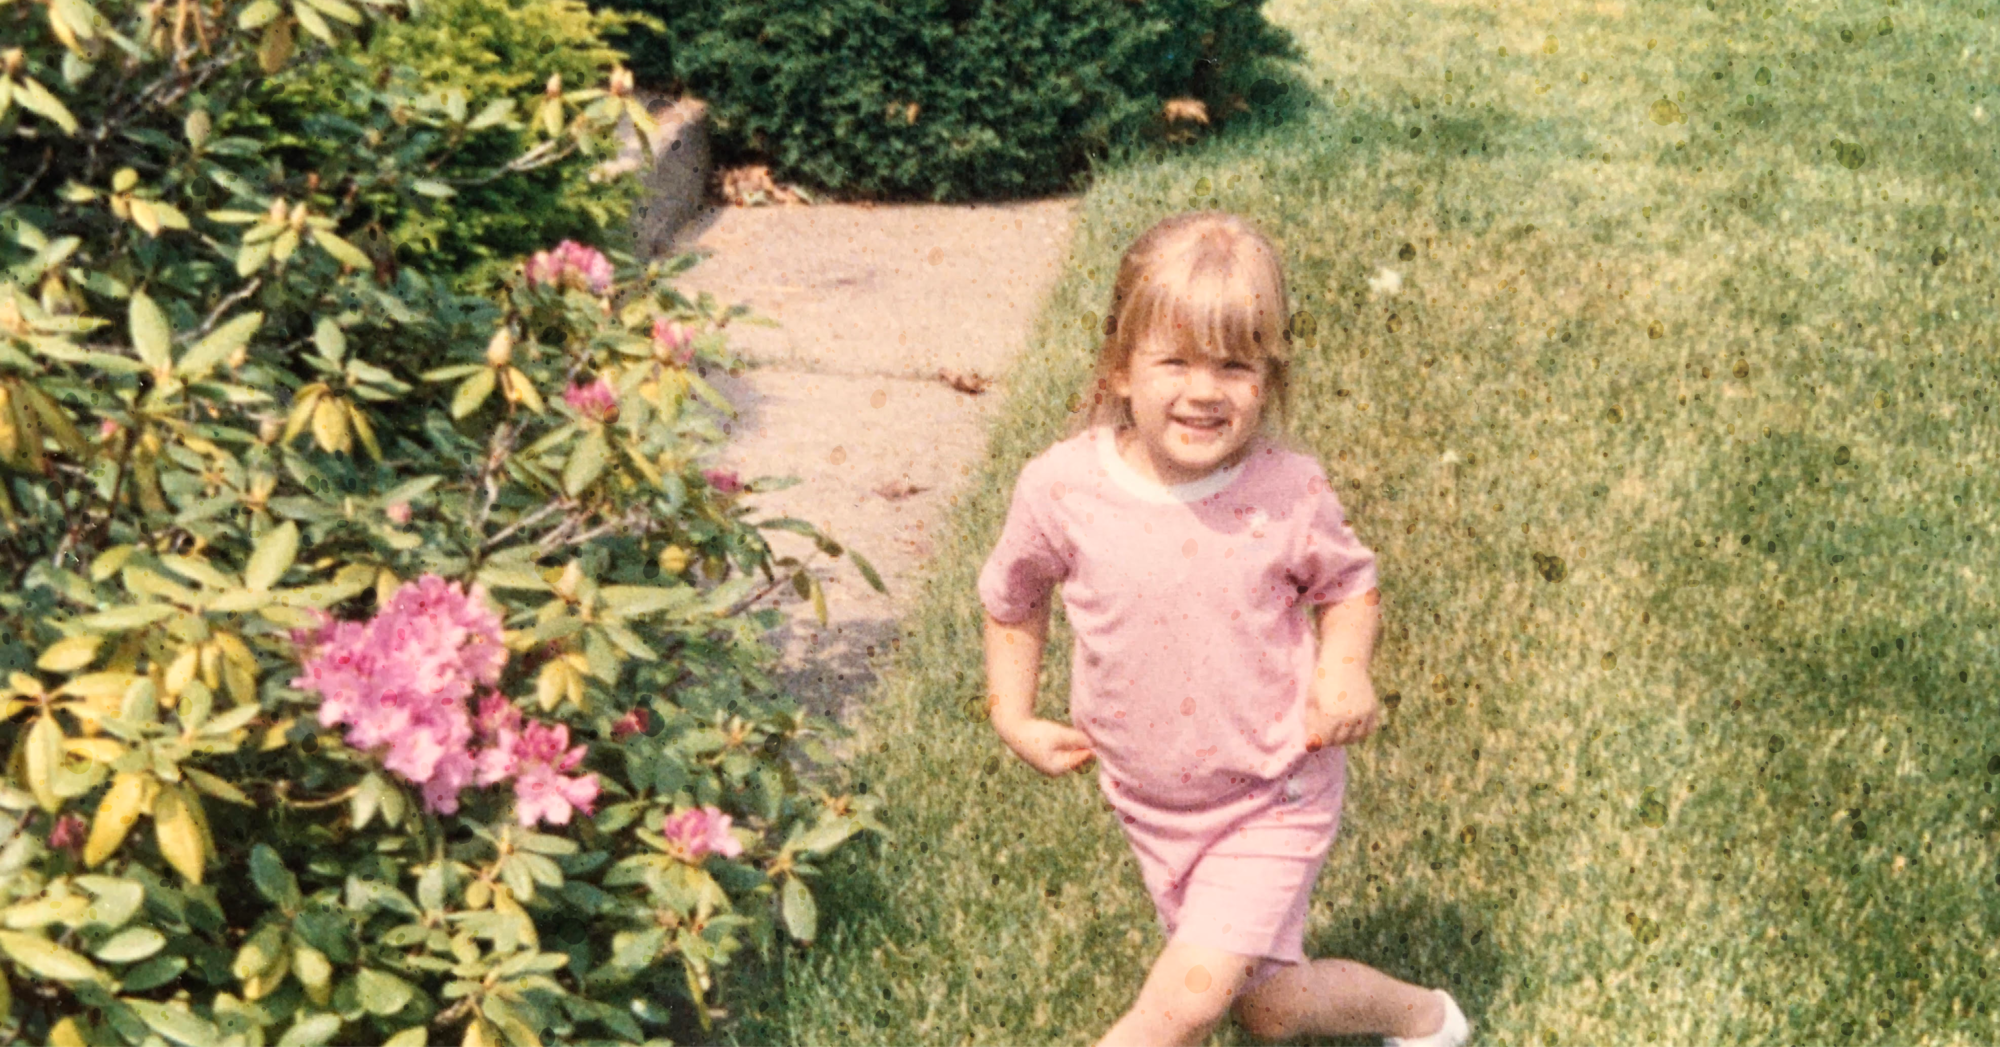 Meg Chittenden as a child in a pink shirt crossing her legs by flowers